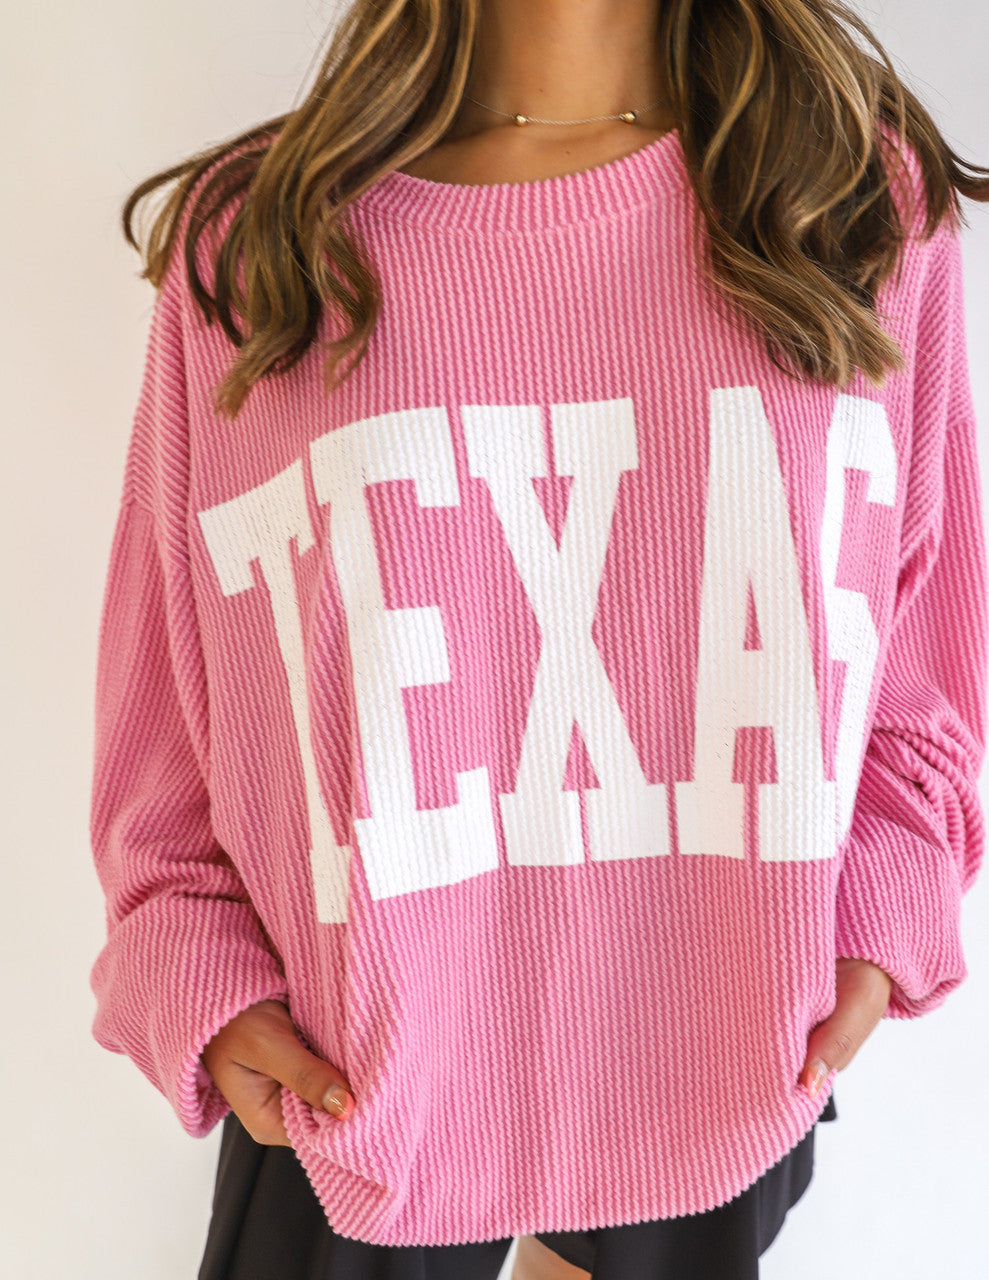 Feel the warmth of Texas with the TX Time Sweater. This cozy graphic sweatshirt features a crew neck, long drop-shoulder sleeves and corded fabric for a supremely comfortable fit. Make Texas proud and show your style with this stylish and comfortable pullover.